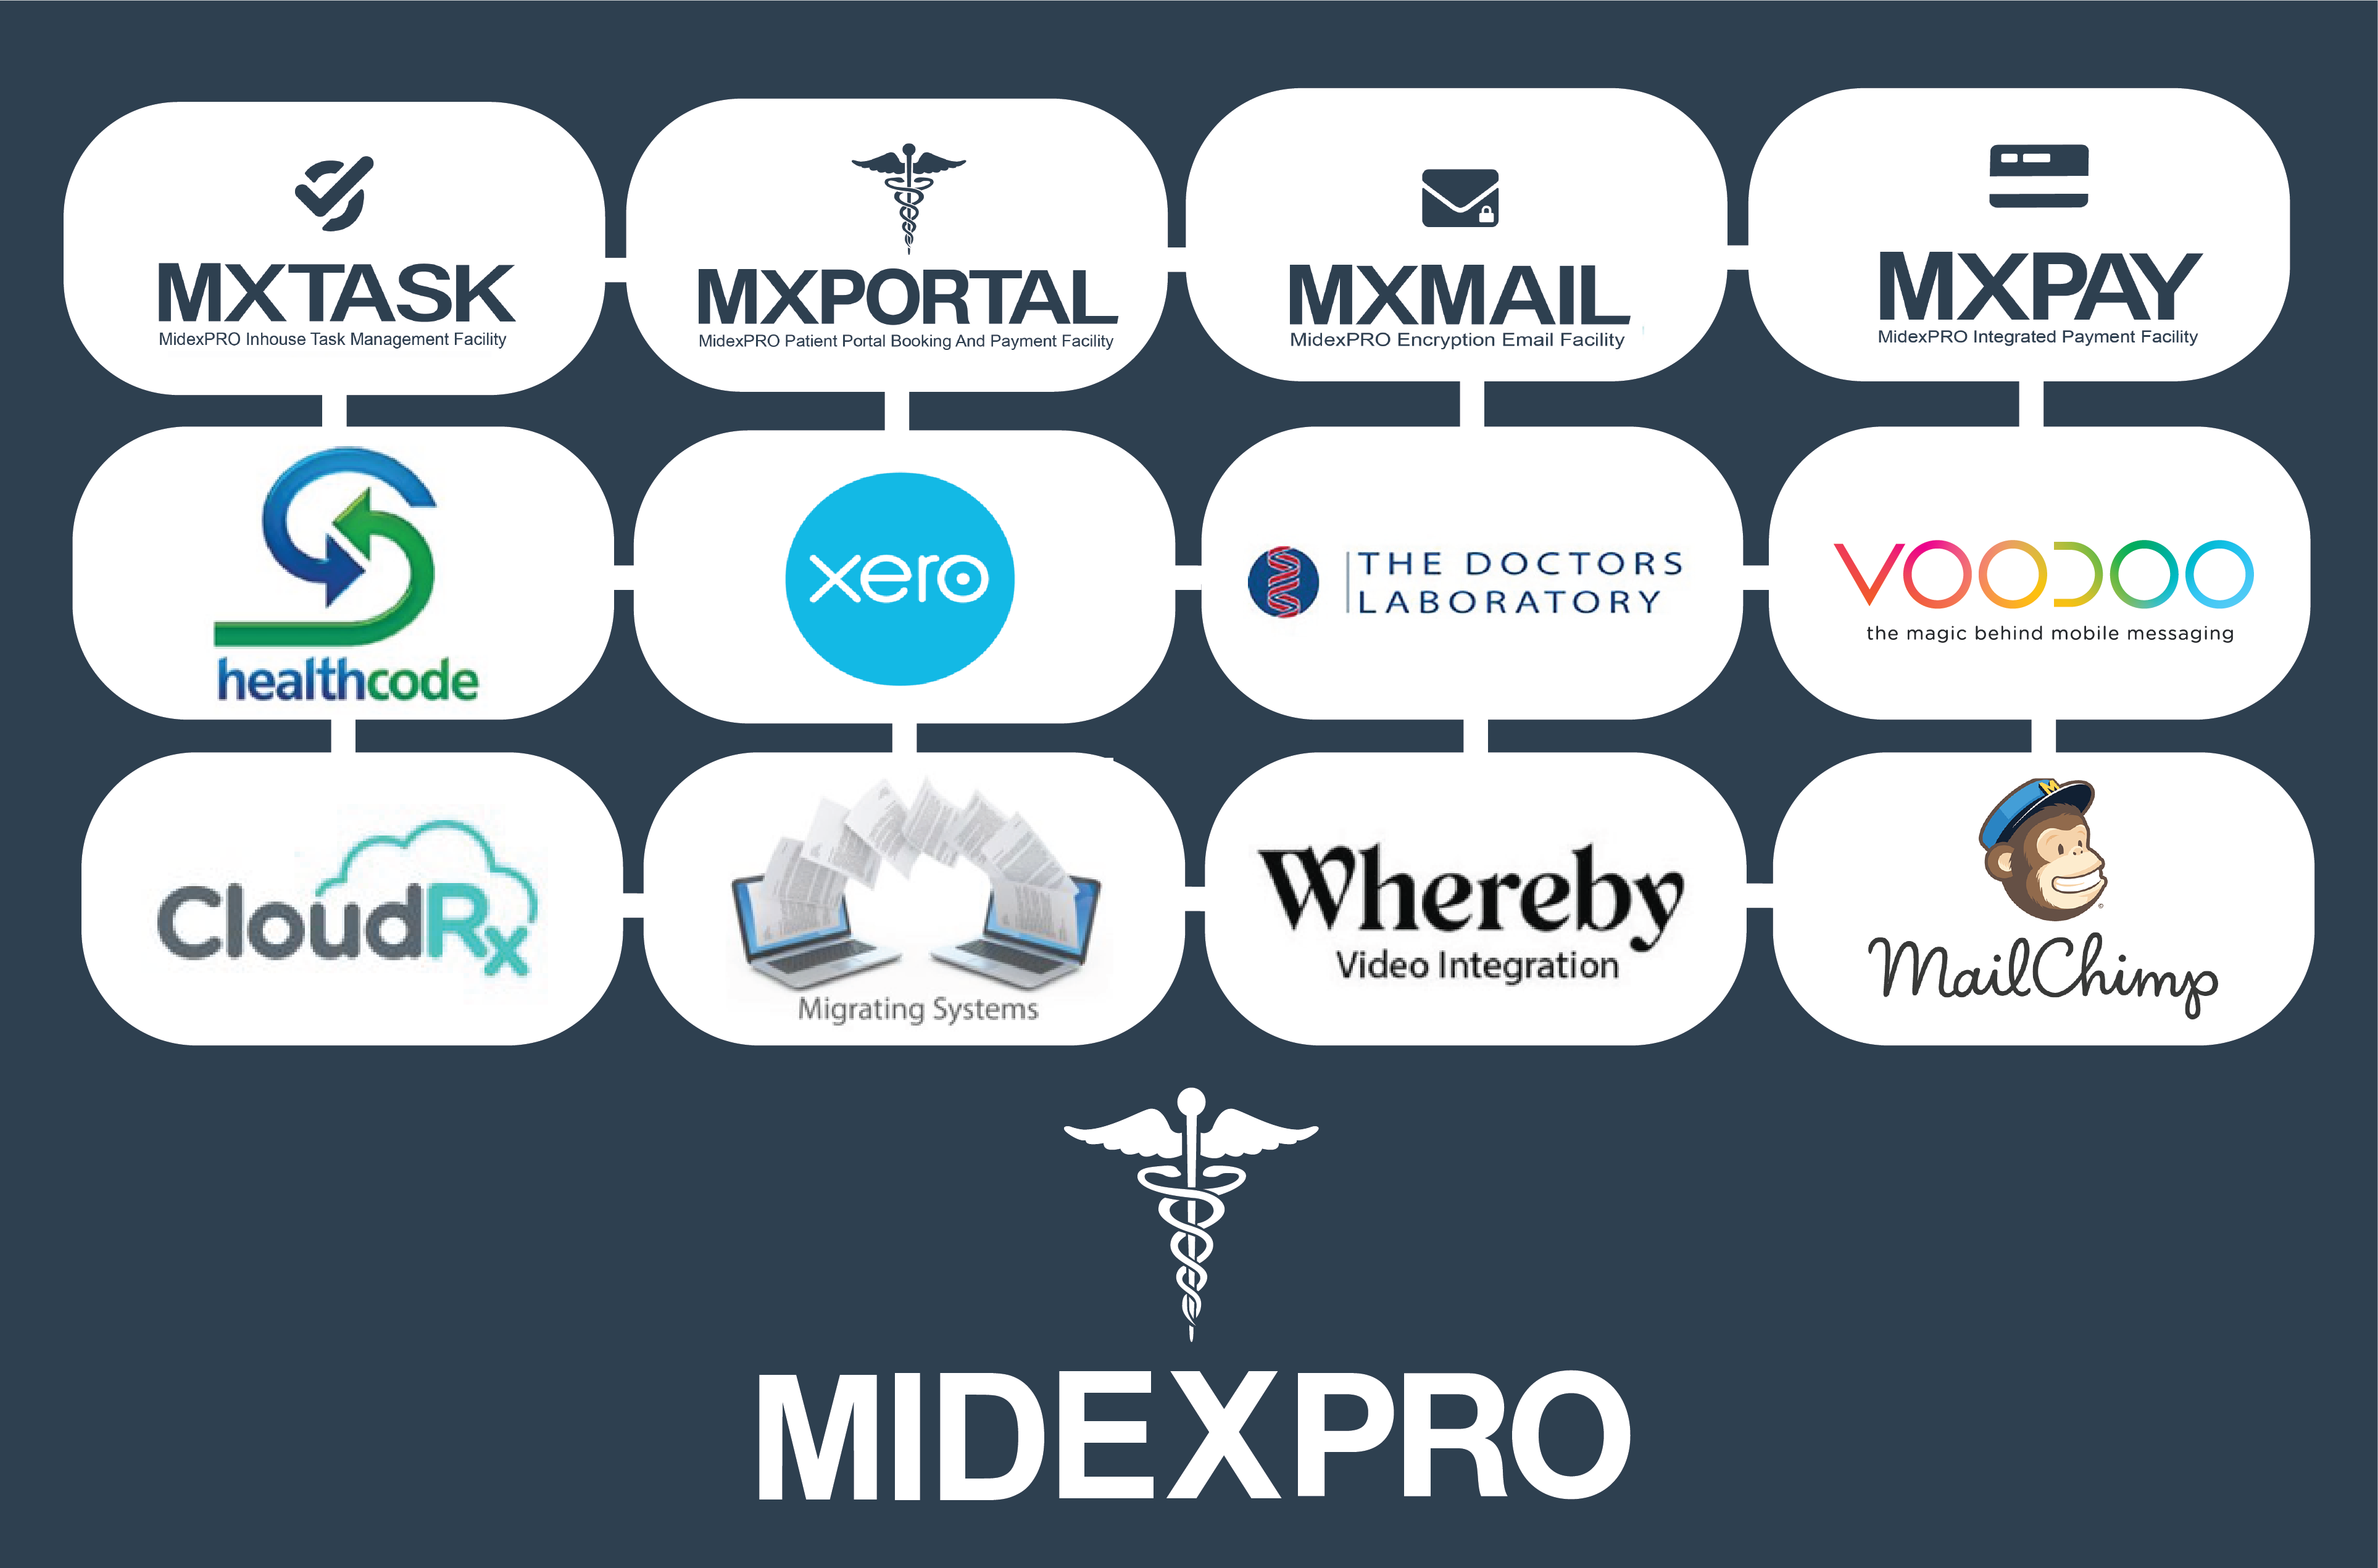 Many integrations which enhance you daily activity including the fully integrated Accounting platform, Xero. Allowing you to raise invoices through MidexPRO and manage any reports needed for HMRC returns. .